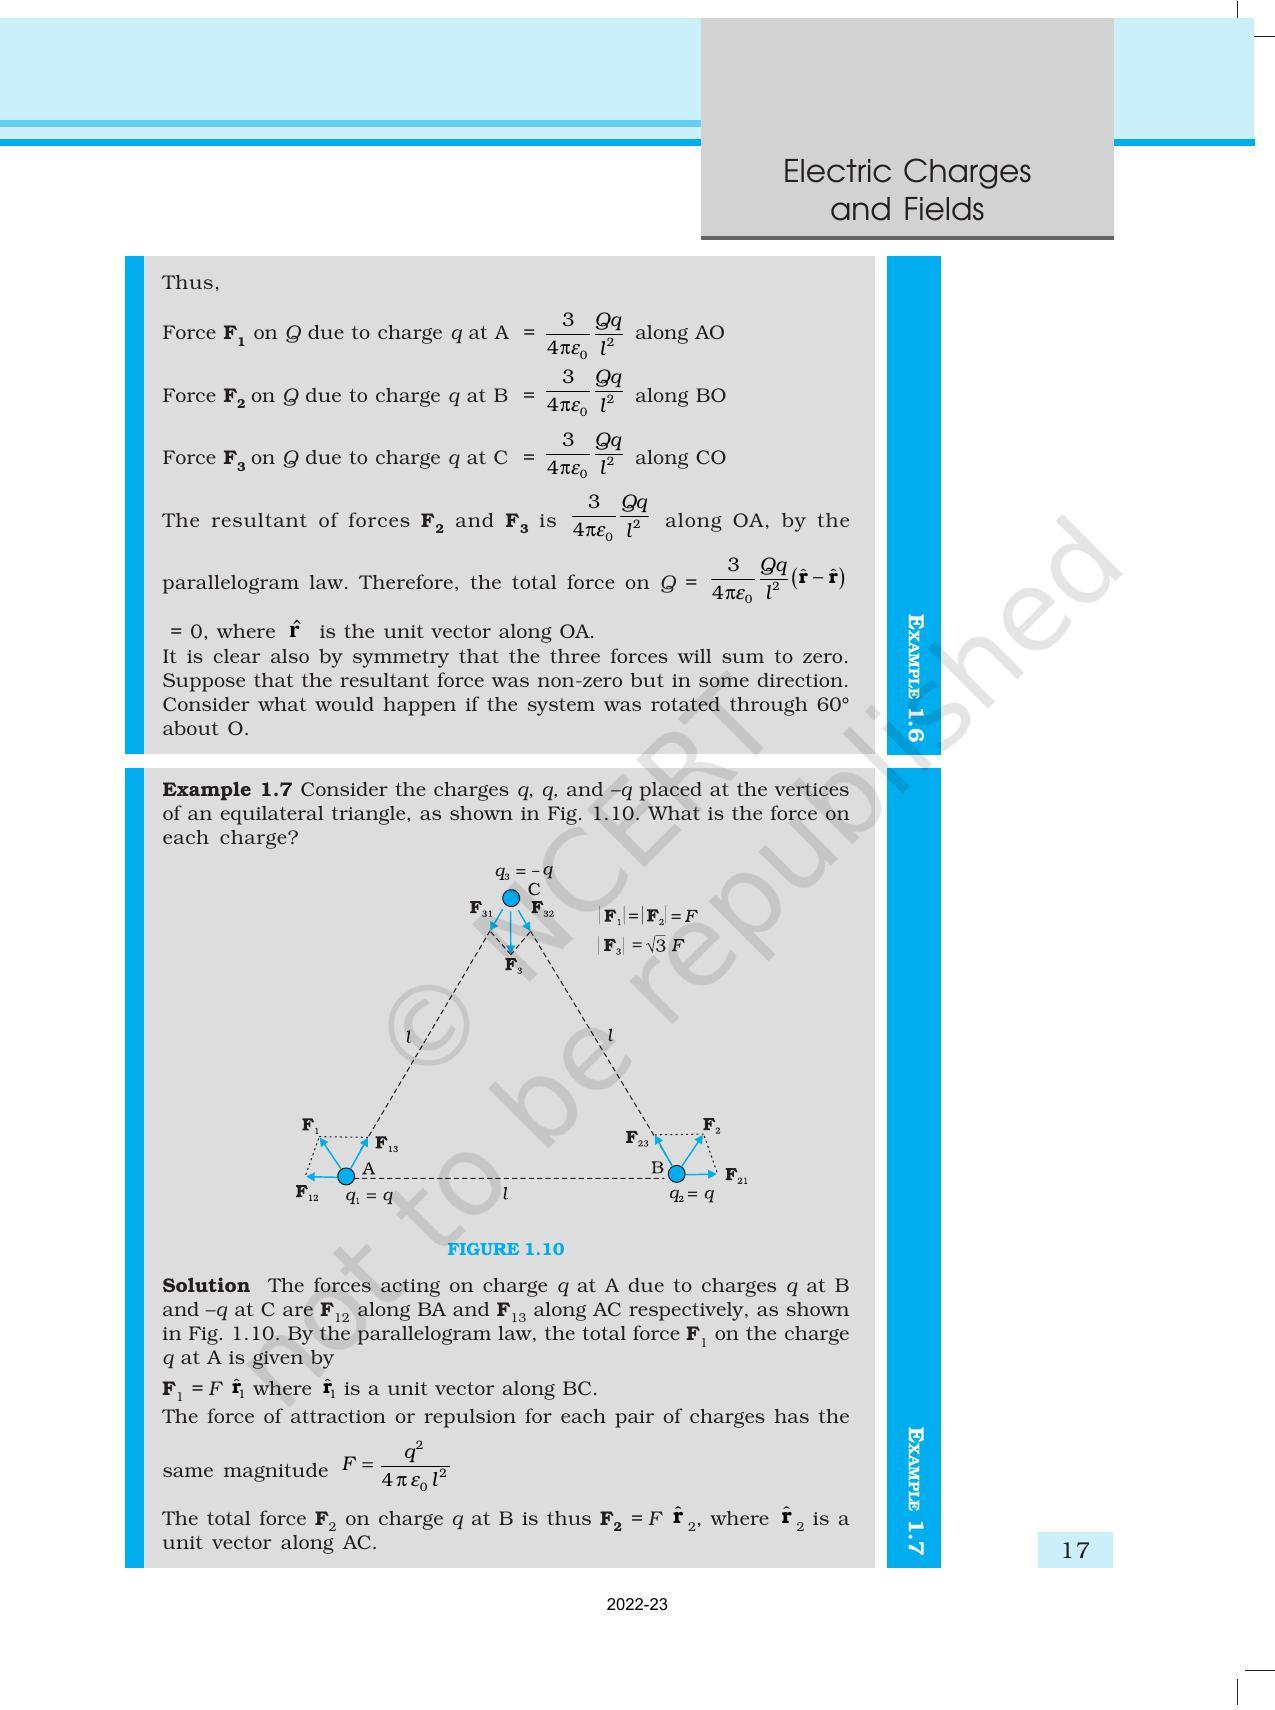 NCERT Book for Class 12 Physics Chapter 1 Electric Charges and Fields - Page 17